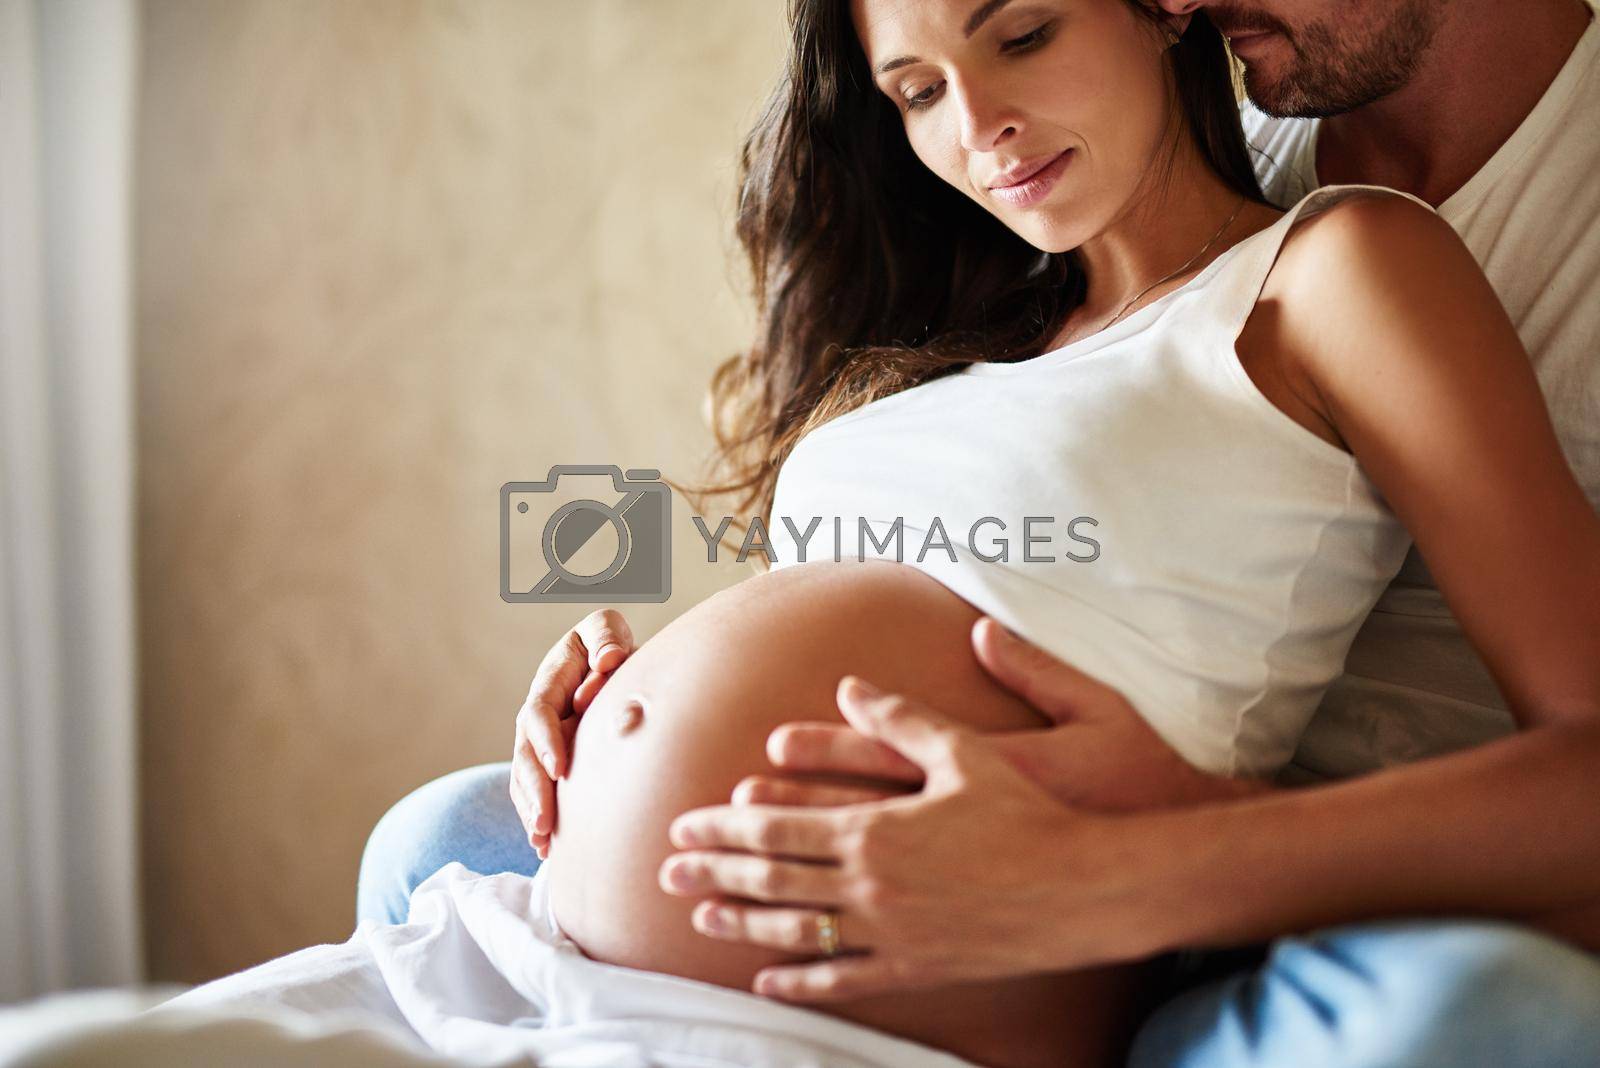 Shot of a husband and pregnant wife sitting together in a bedroom.